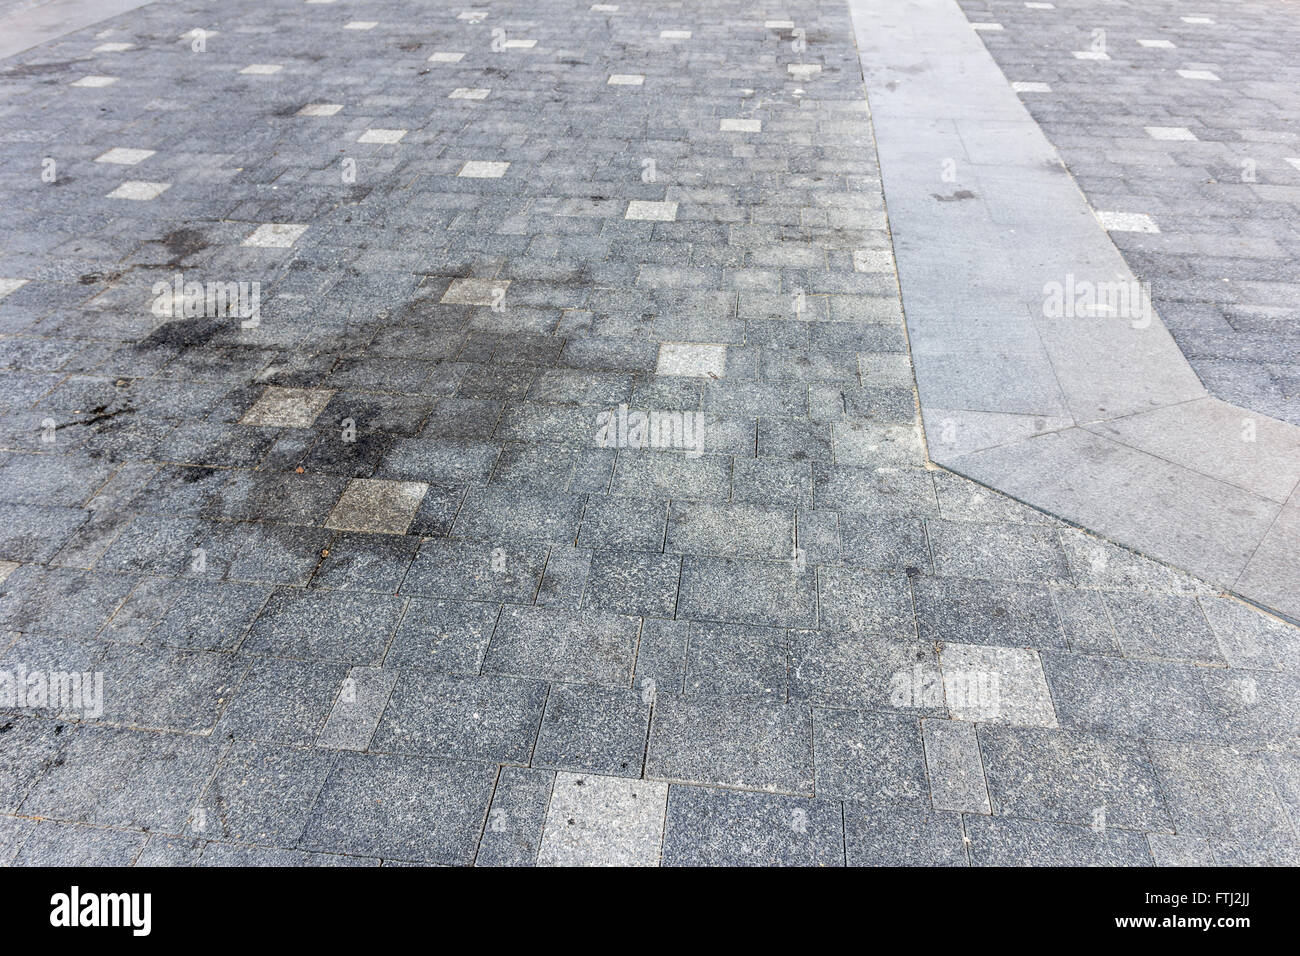 Perspective View of Monotone Gray dirty Brick Stone Street Road. Sidewalk, Pavement Texture Background Stock Photo